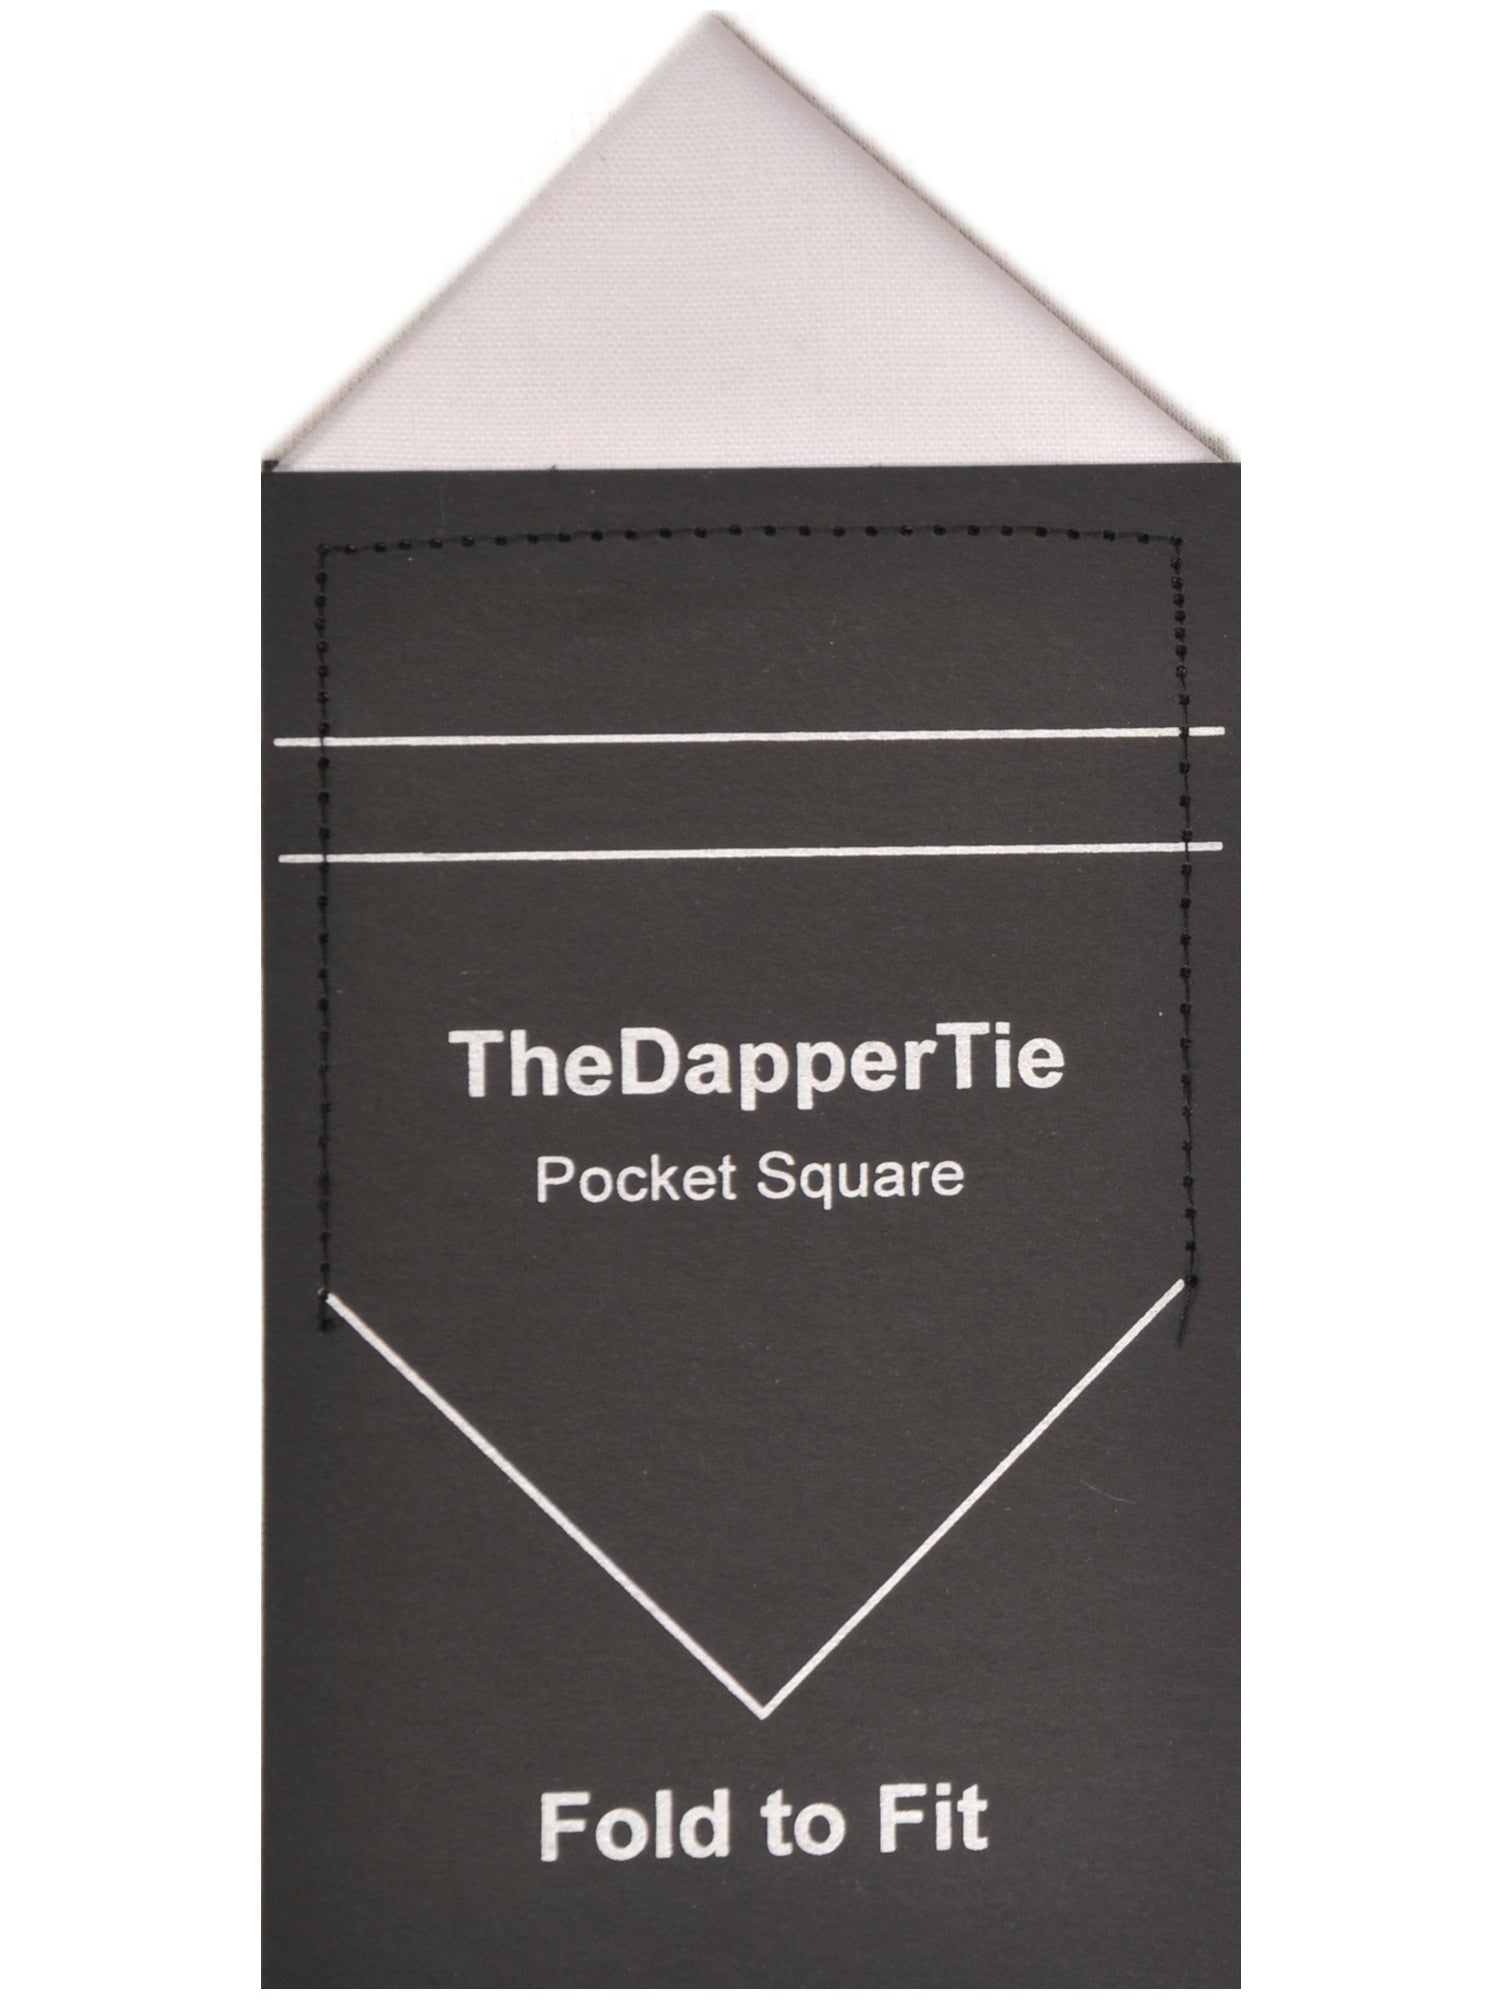 Men's White Linen Triangle Folded Pocket Square  From TheDapperTie Prefolded Pocket Squares TheDapperTie White Regular 